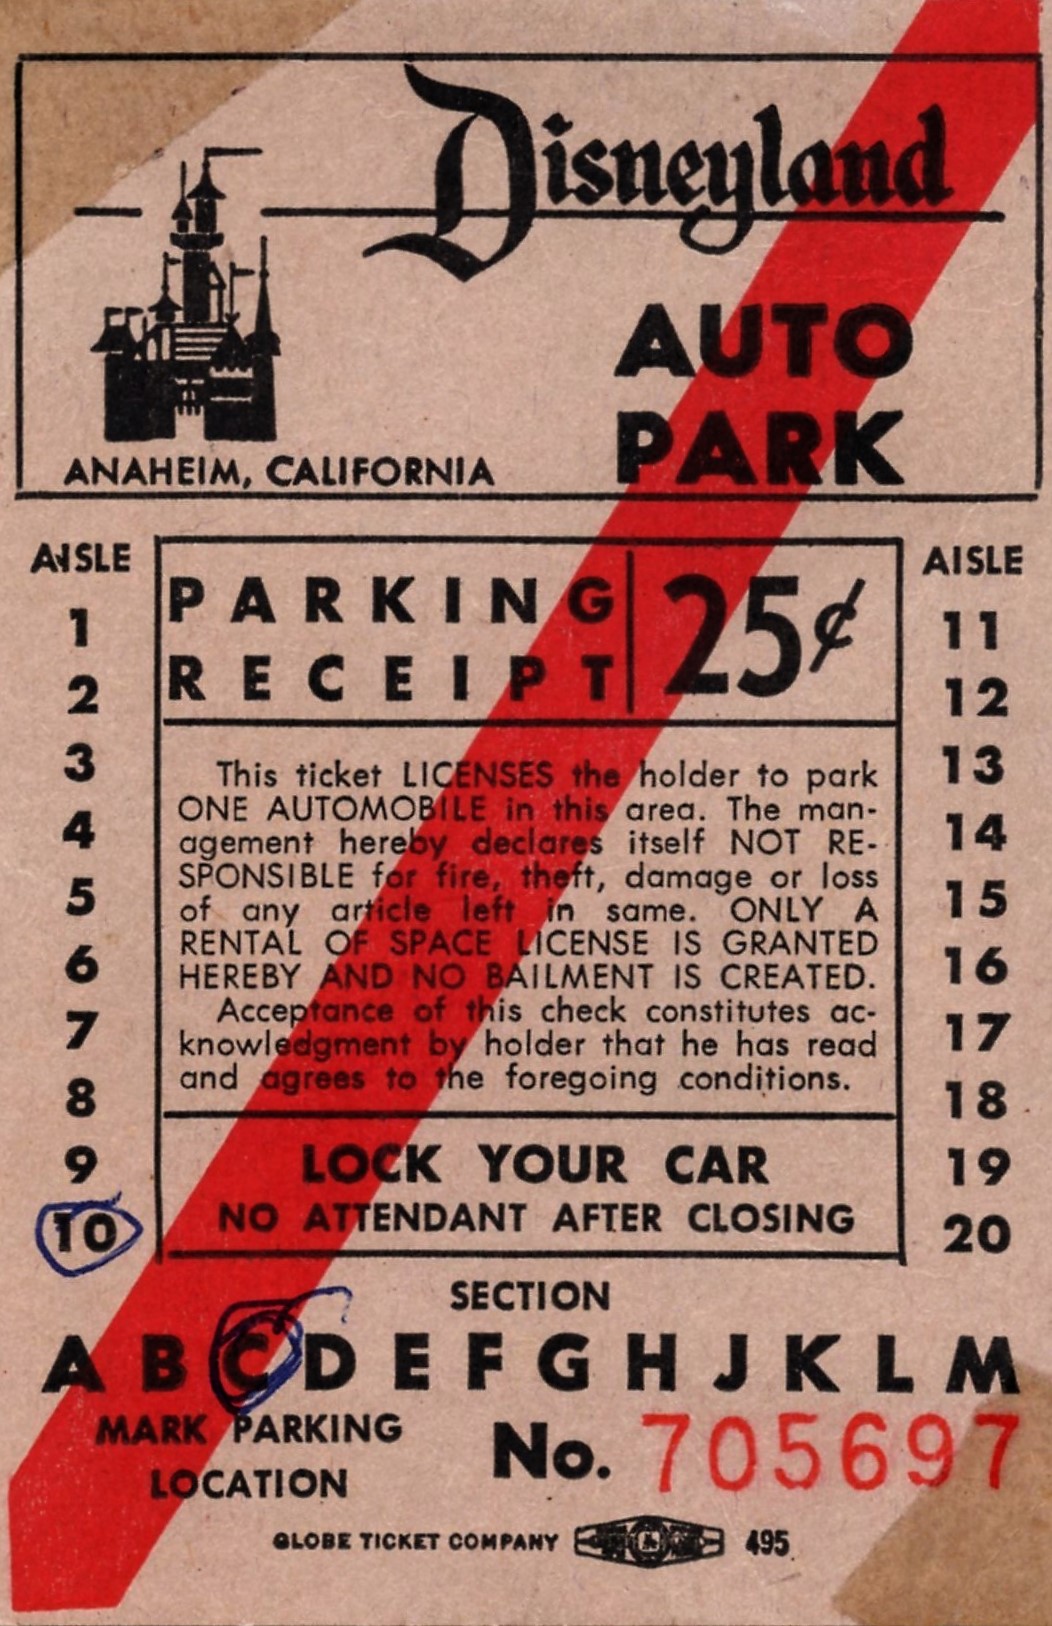 A used parking ticket from Disneyland in 1955